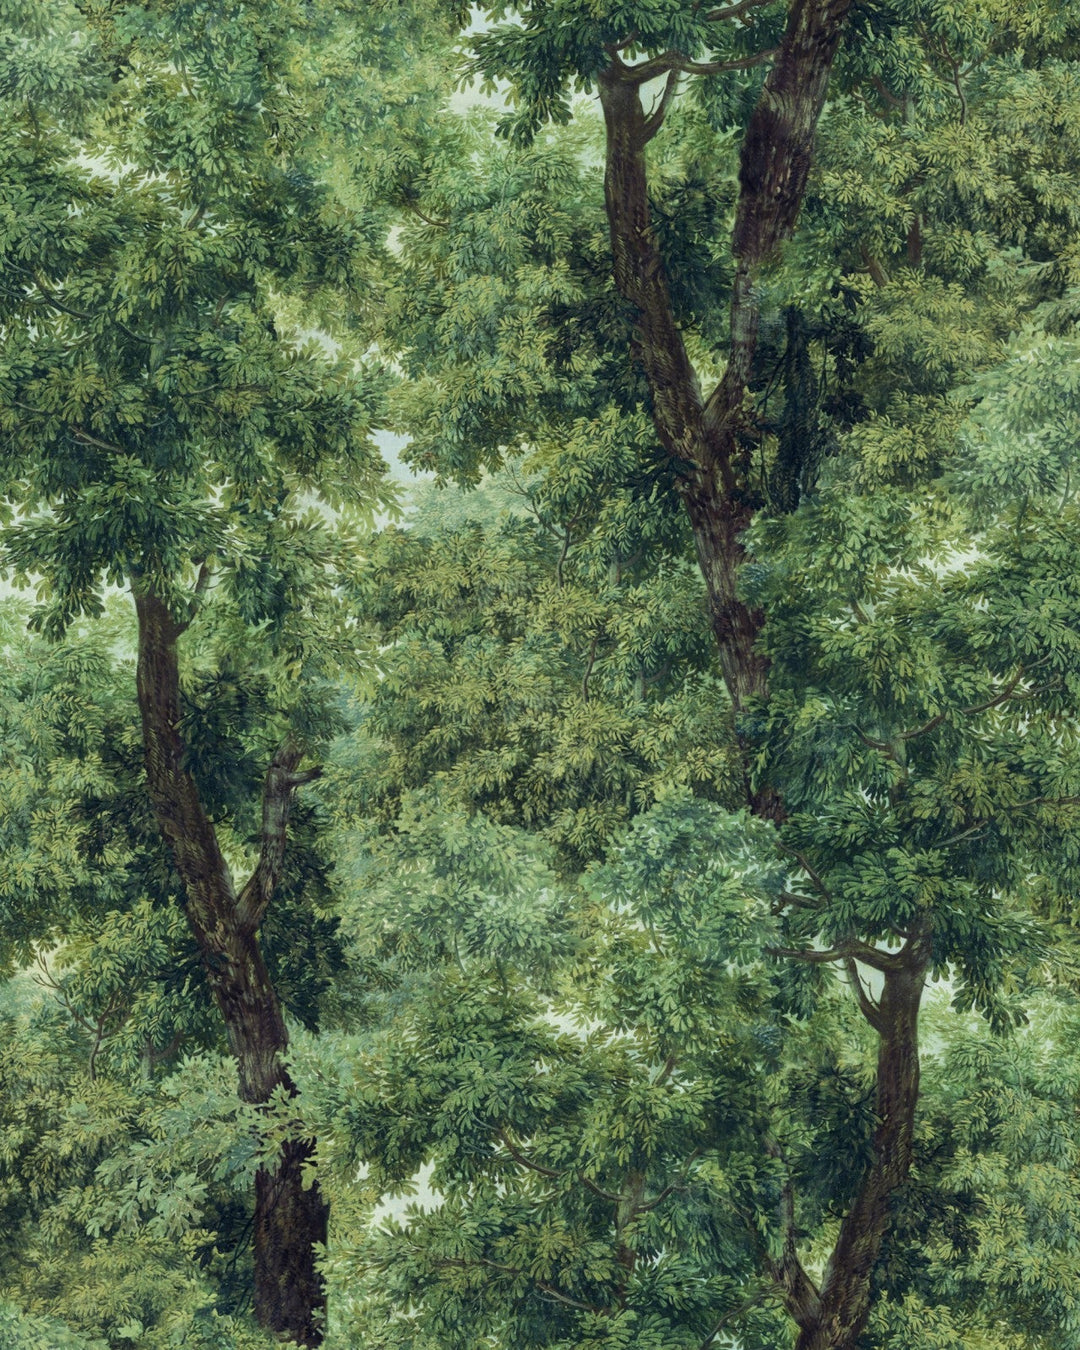 Mind-the-Gap-wallpaper-Branchy-leafy-dense-forest-woodland-illustrated-mural-style-forest-trees-leaves-woodland-scene-elegant-full-wall-forest-print-meadow-green